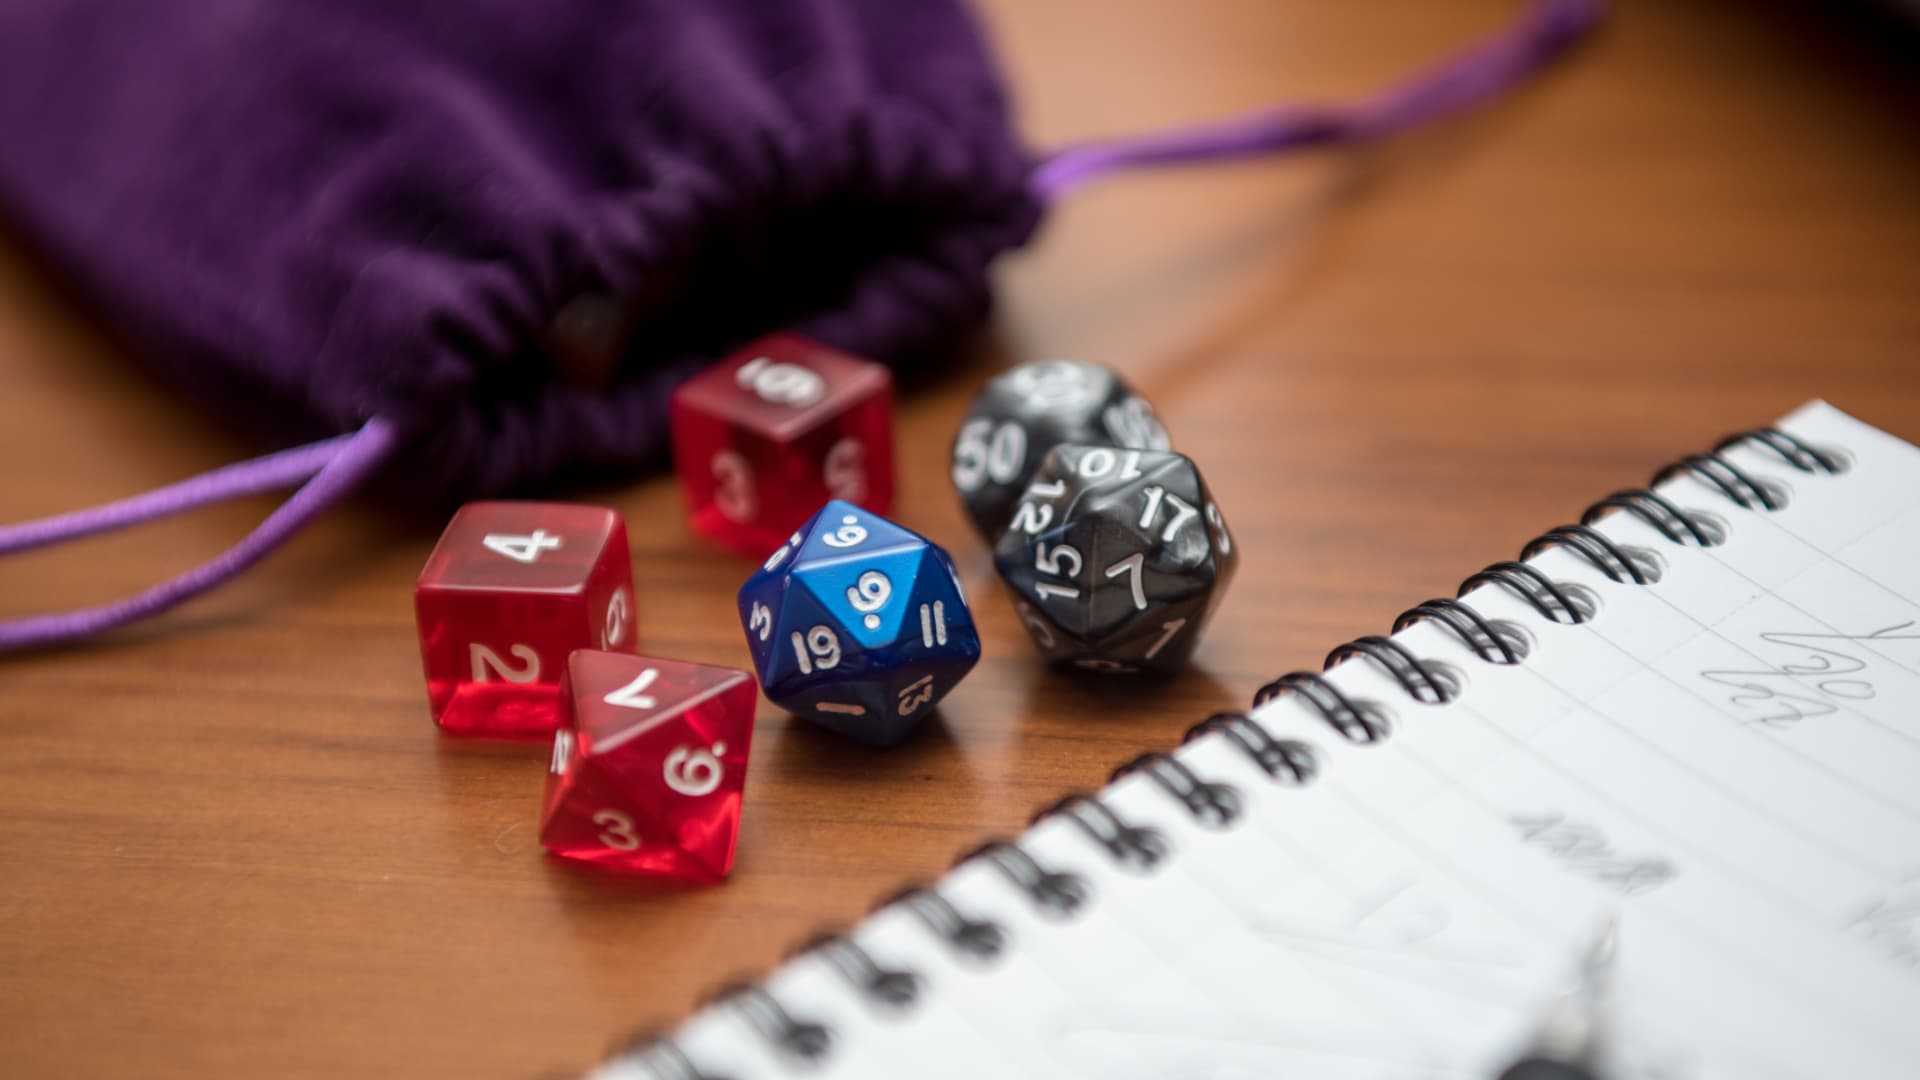 Hasbro delays new Dungeons & Dragons licensing rules following fan backlash – CNBC